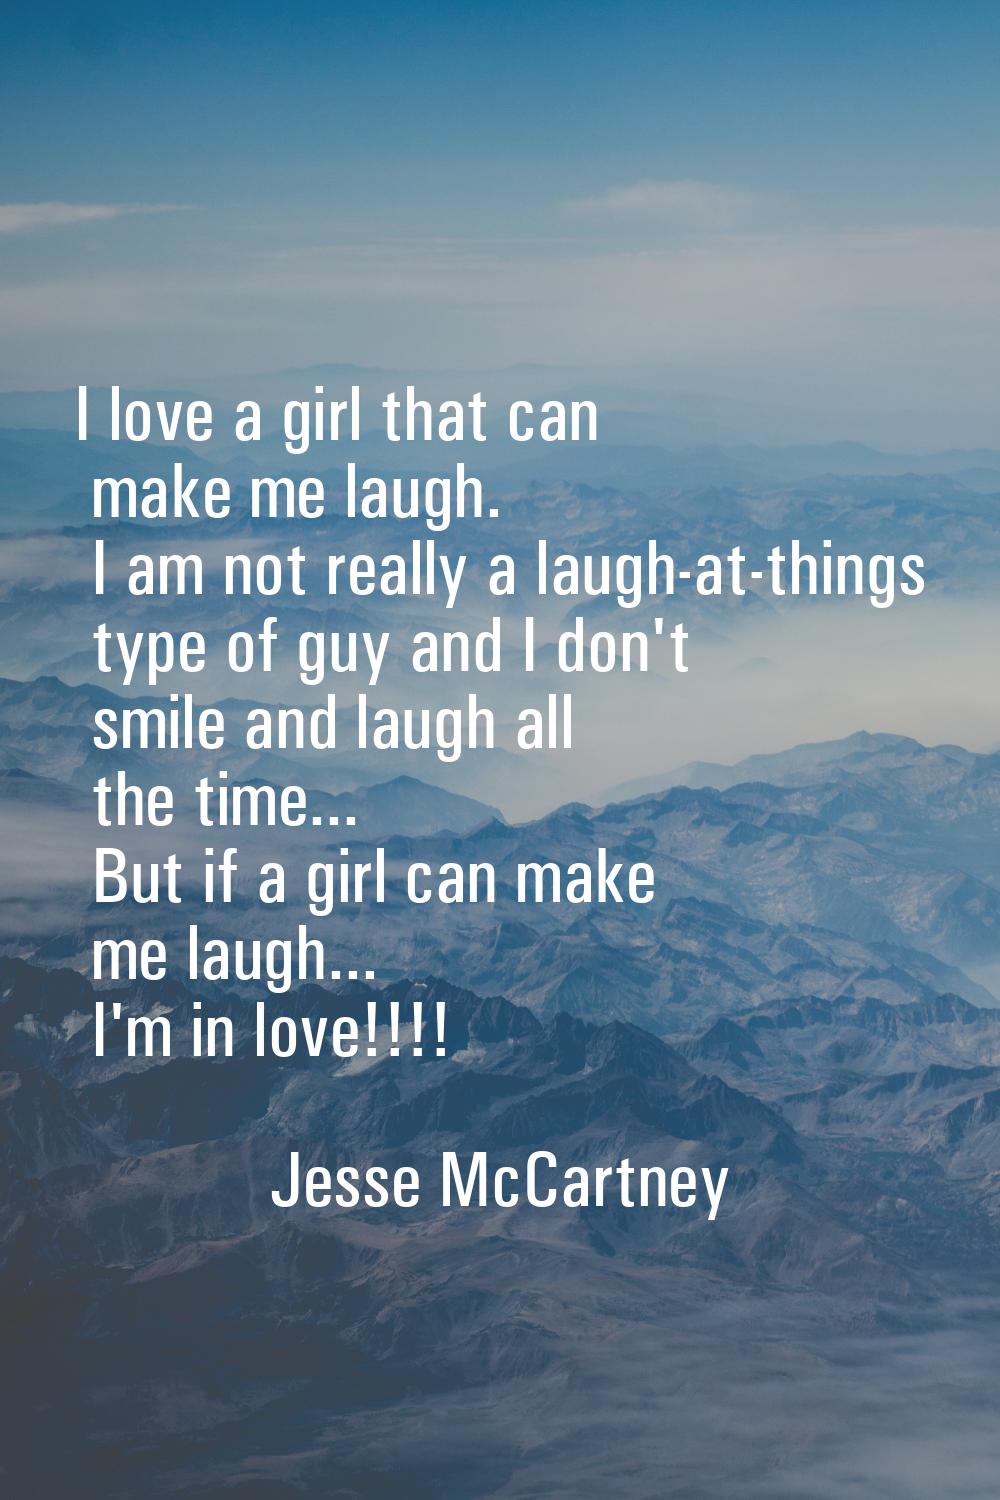 I love a girl that can make me laugh. I am not really a laugh-at-things type of guy and I don't smi